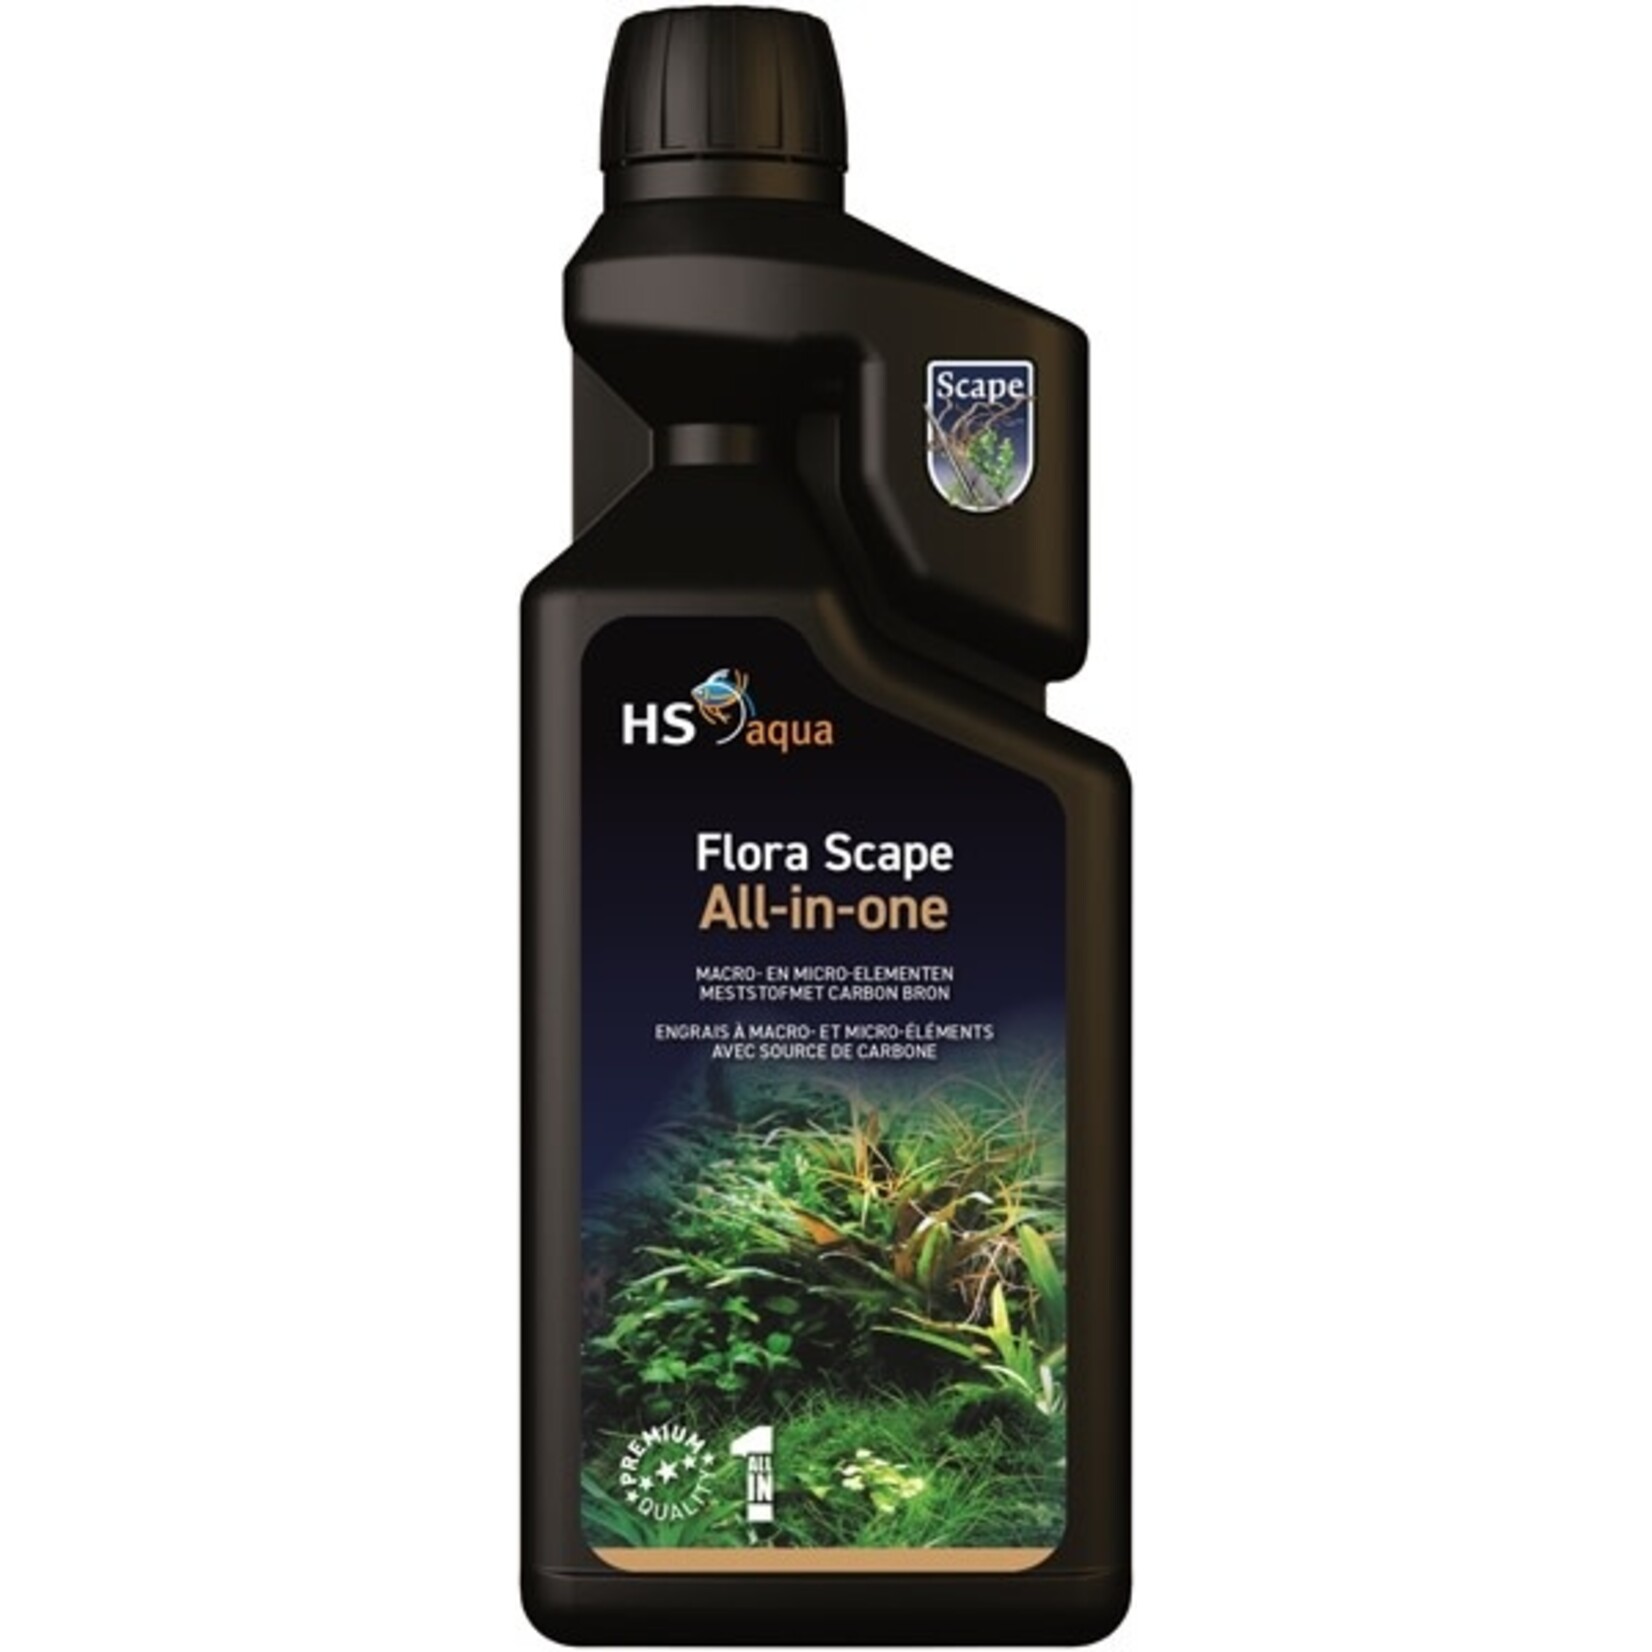 HS Aqua Flora scape all-in-one 1000 ml